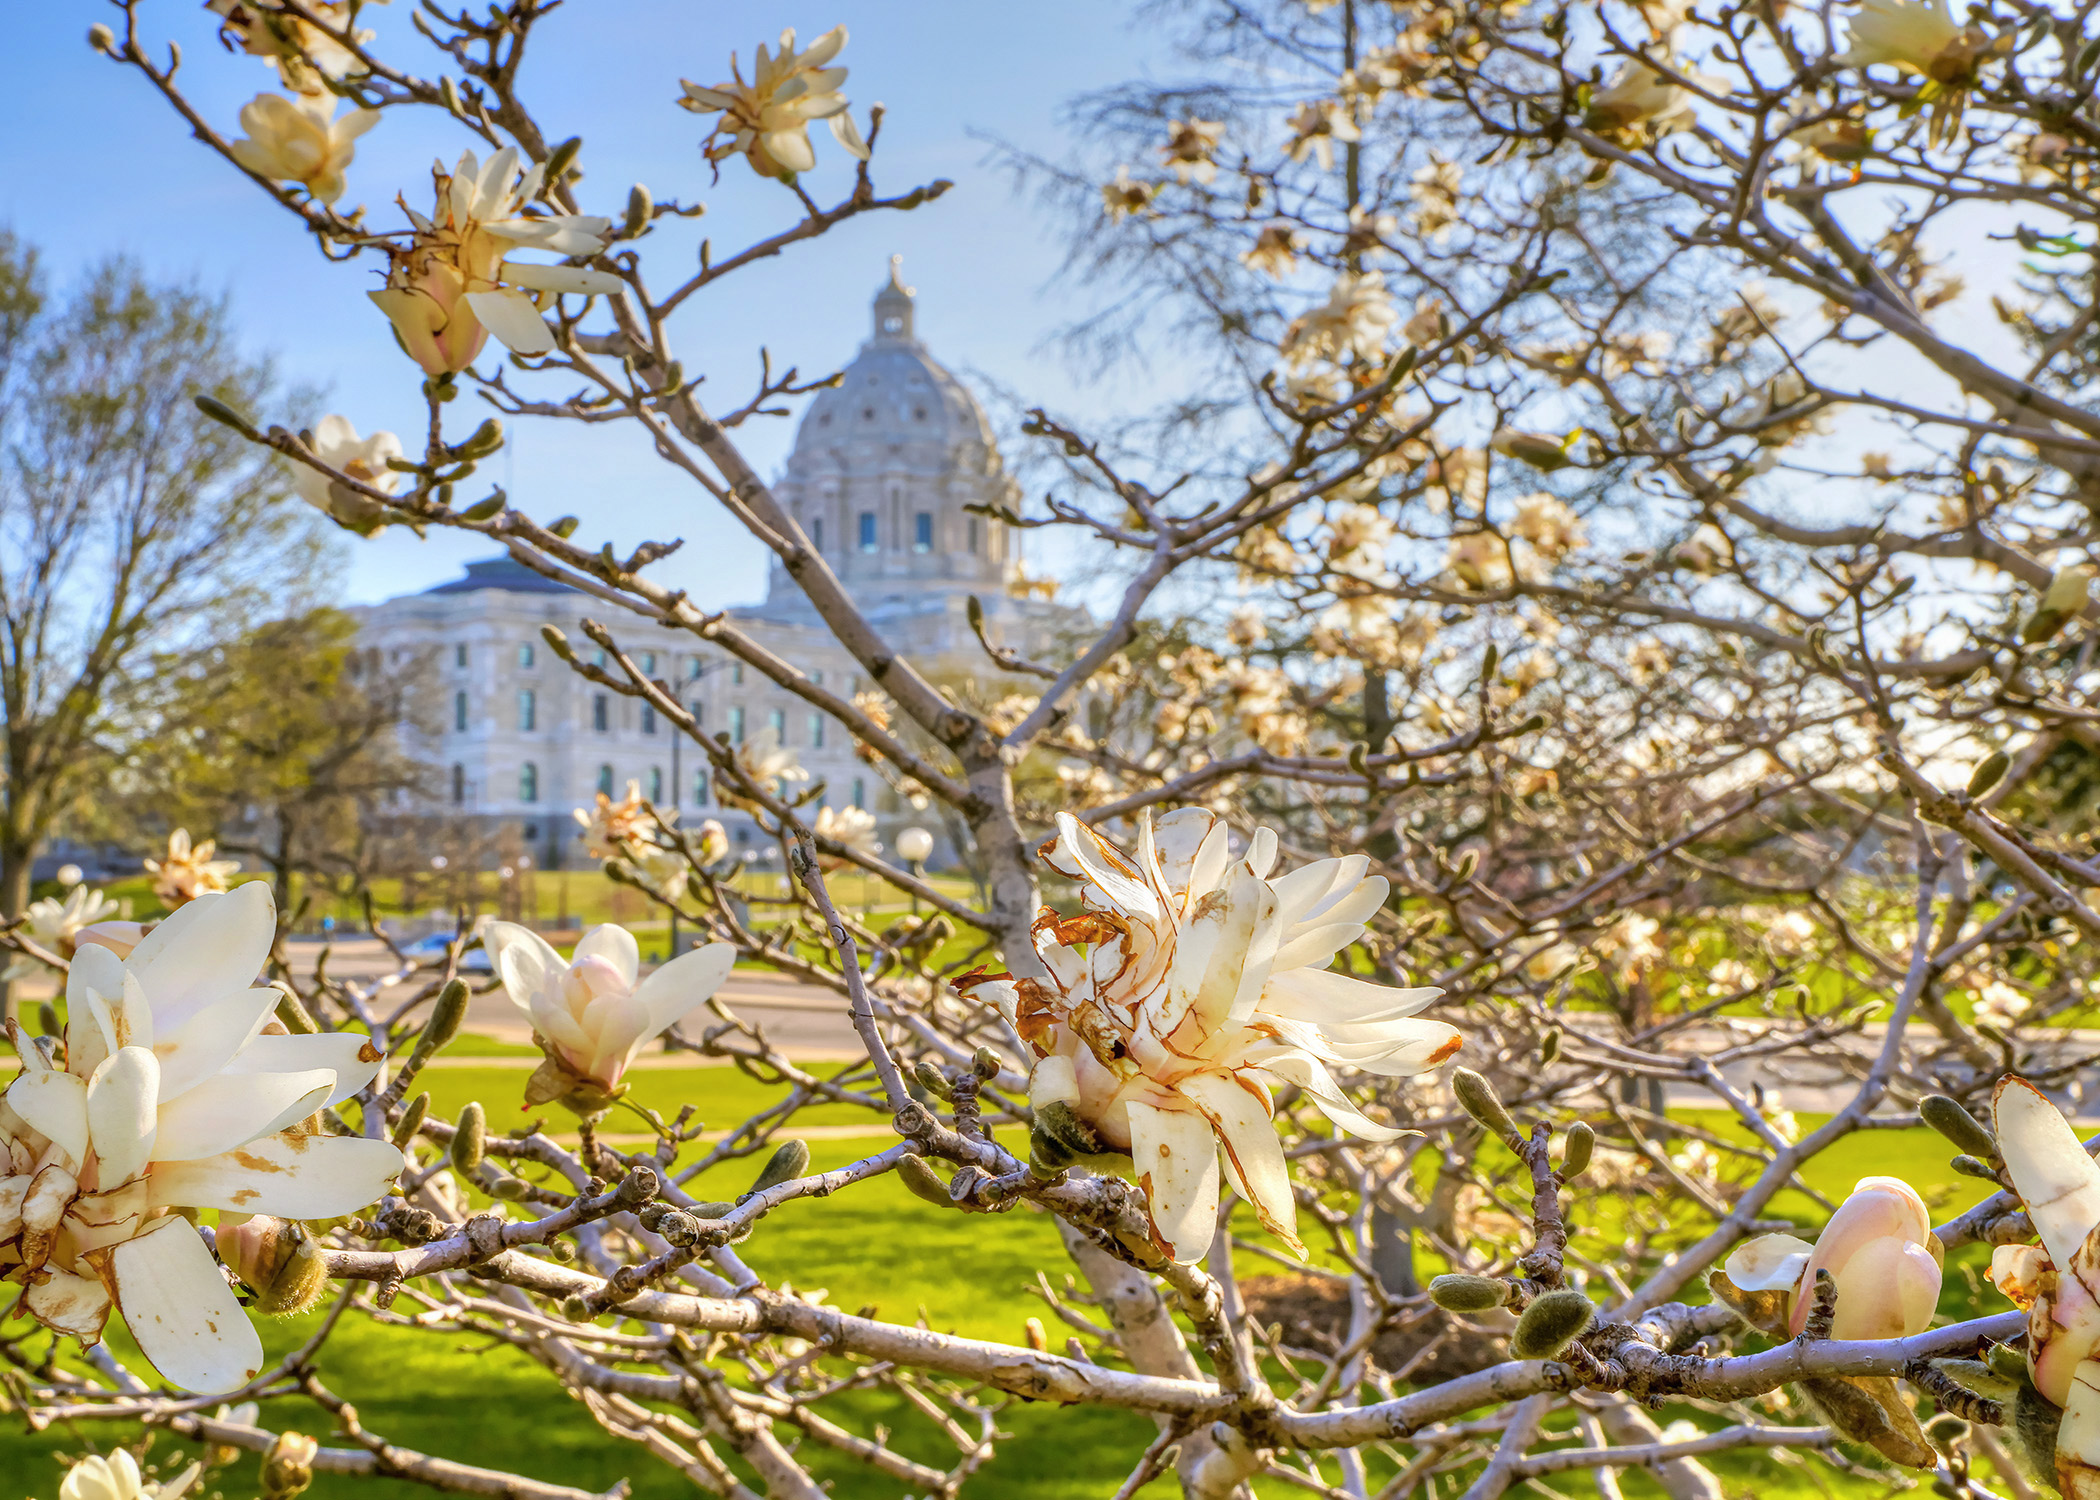 Magnolias bloomed on the grounds of the State Capitol this week. (Photo by Andrew VonBank)